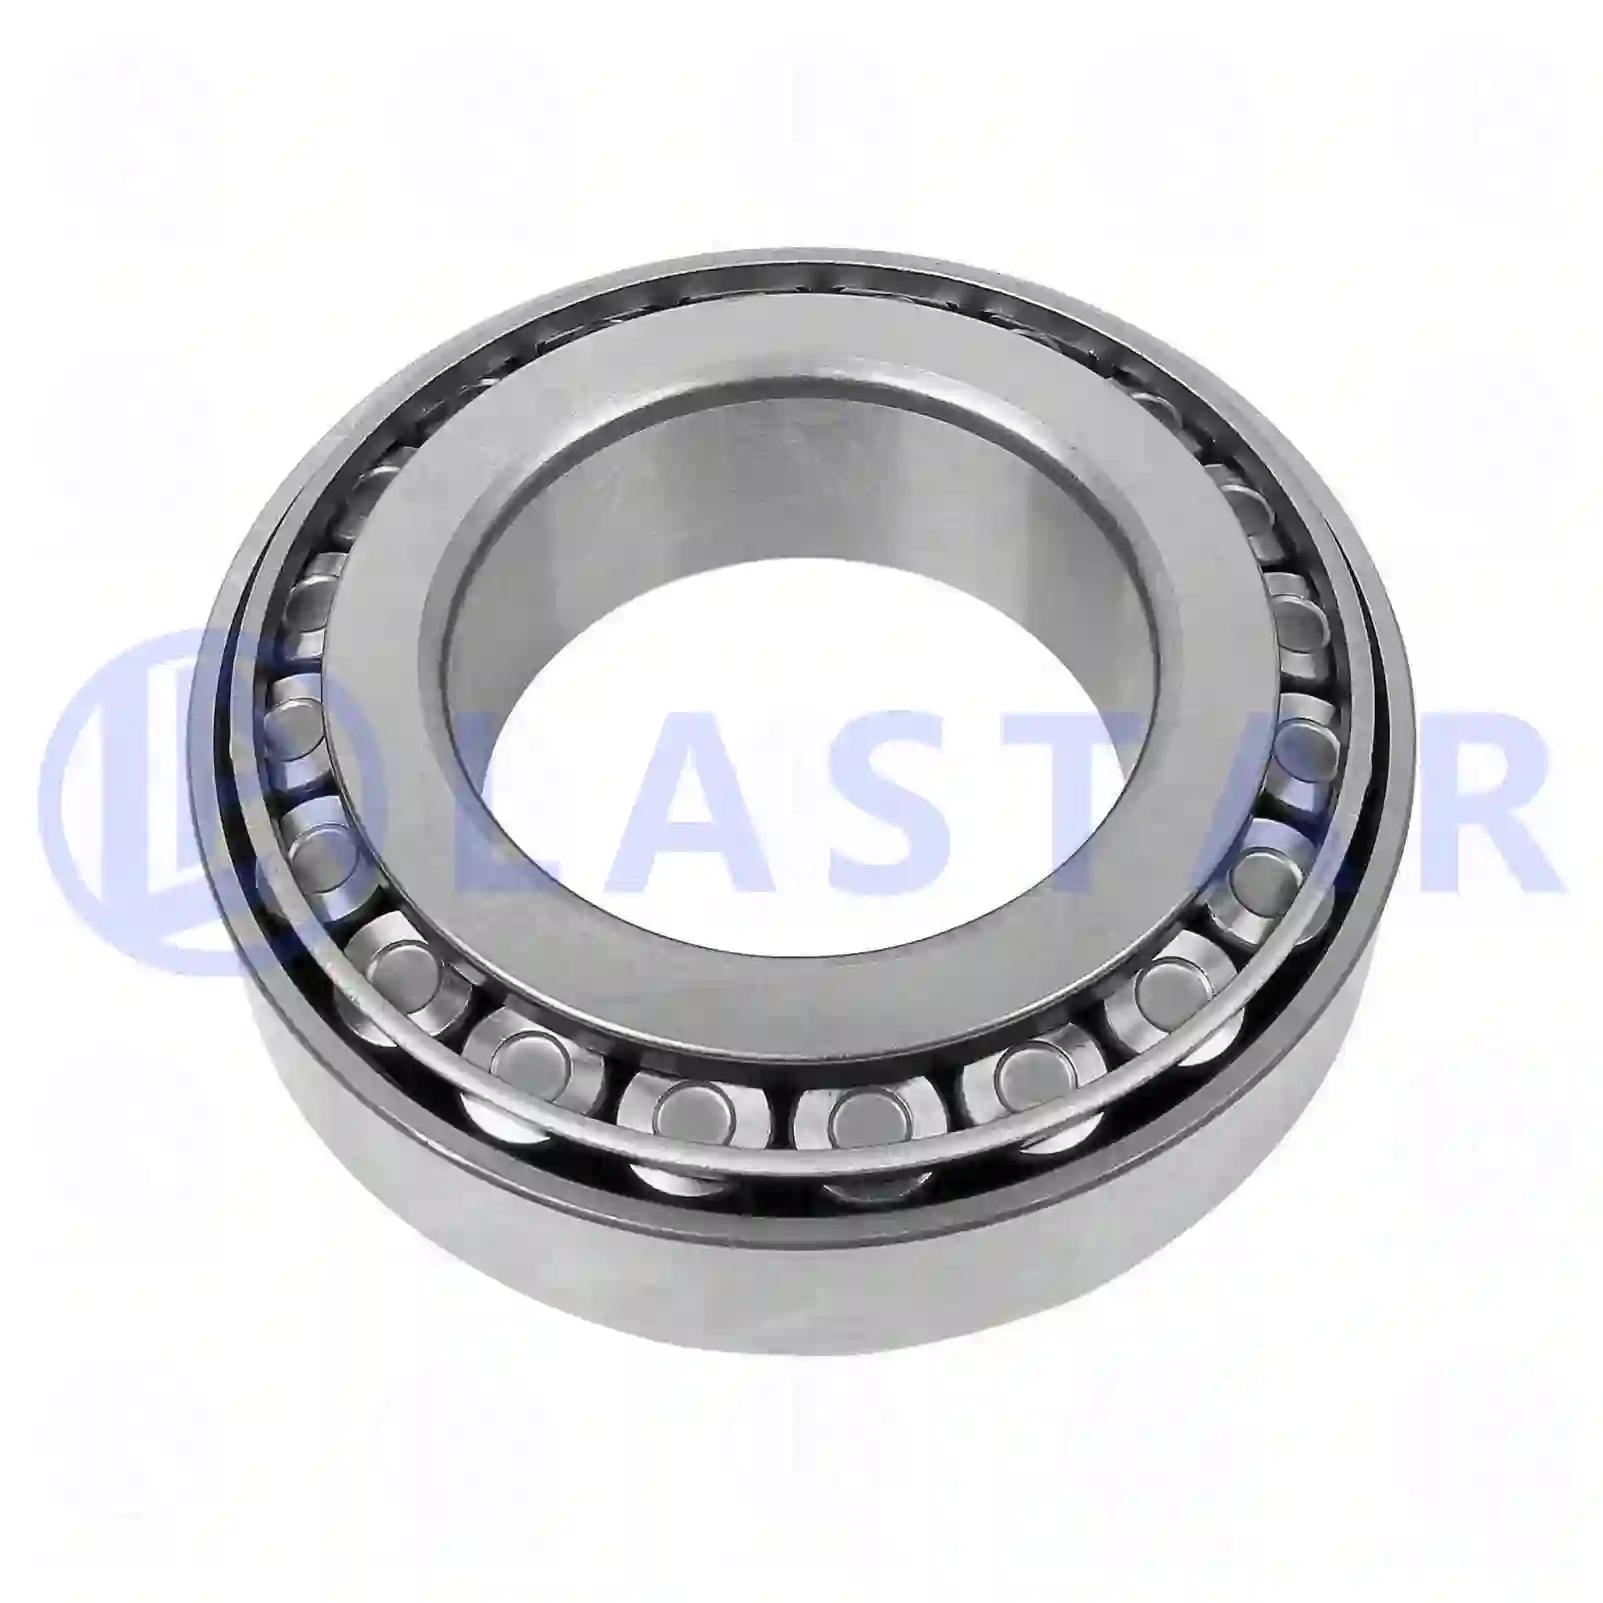 Hub Tapered roller bearing, la no: 77726557 ,  oem no:0264059500, 0264102800, 01905350, 07164543, 26800250, 10500859, 710500859, 94060943, 1-09812077-0, 1-09812195-0, 01905350, 07164543, 07178987, 1905350, 26800250, 3612949500, 7164543, 06324901800, 06324990009, 87523301400, A0023432219, 0009812105, 000720032219, 0023432219, 0959232219, 5000020632, 33725, 4200002600, 33948, 36129495, 1704000X, 181086, 181088 Lastar Spare Part | Truck Spare Parts, Auotomotive Spare Parts